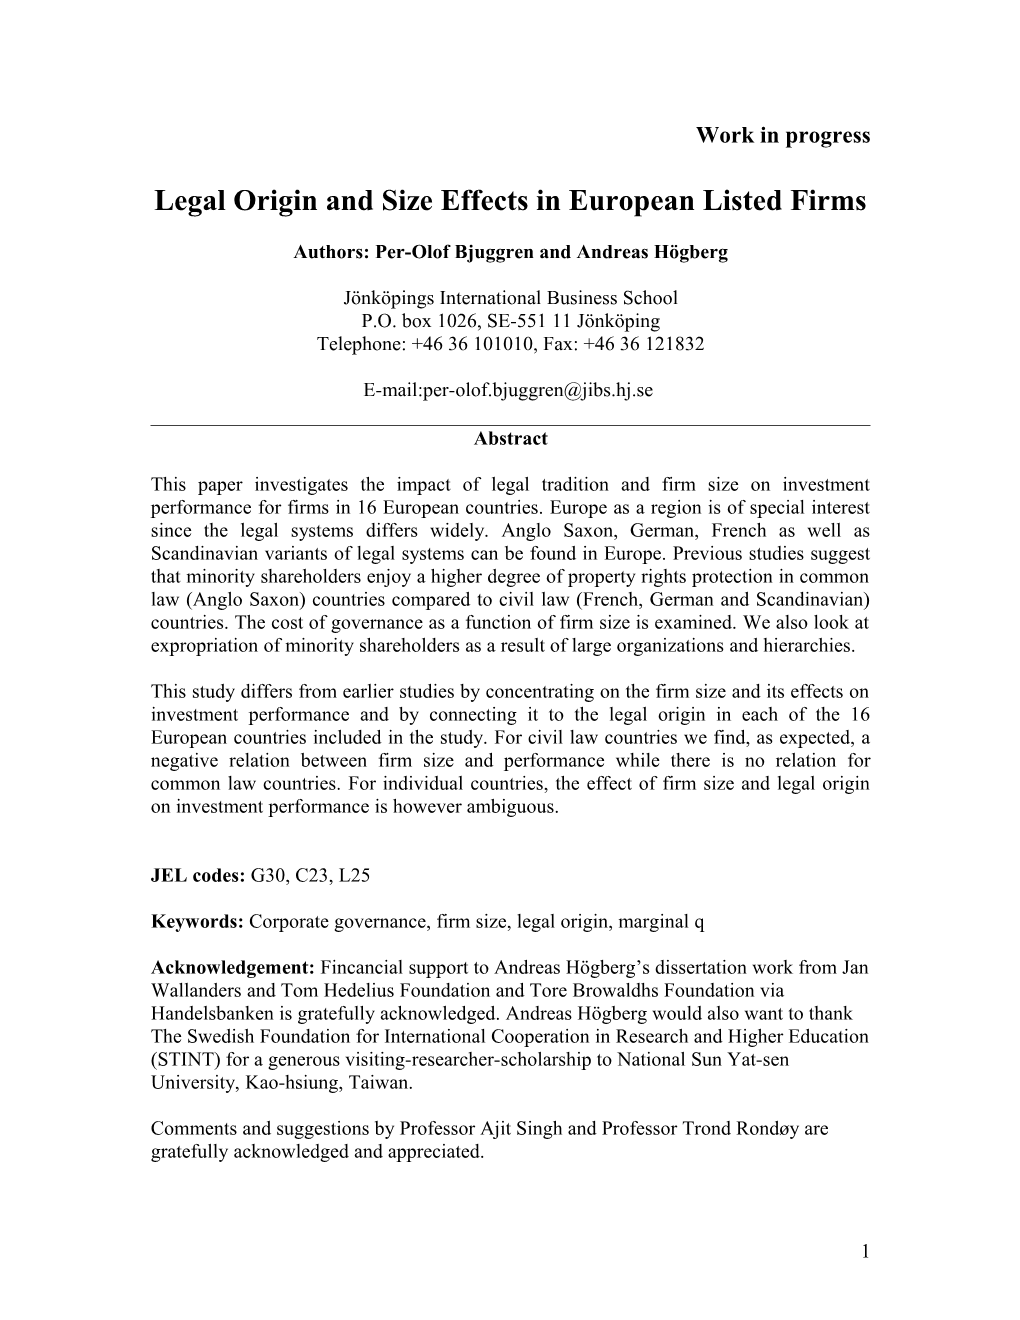 Legal Origin and Size Effects in European Listed Firms